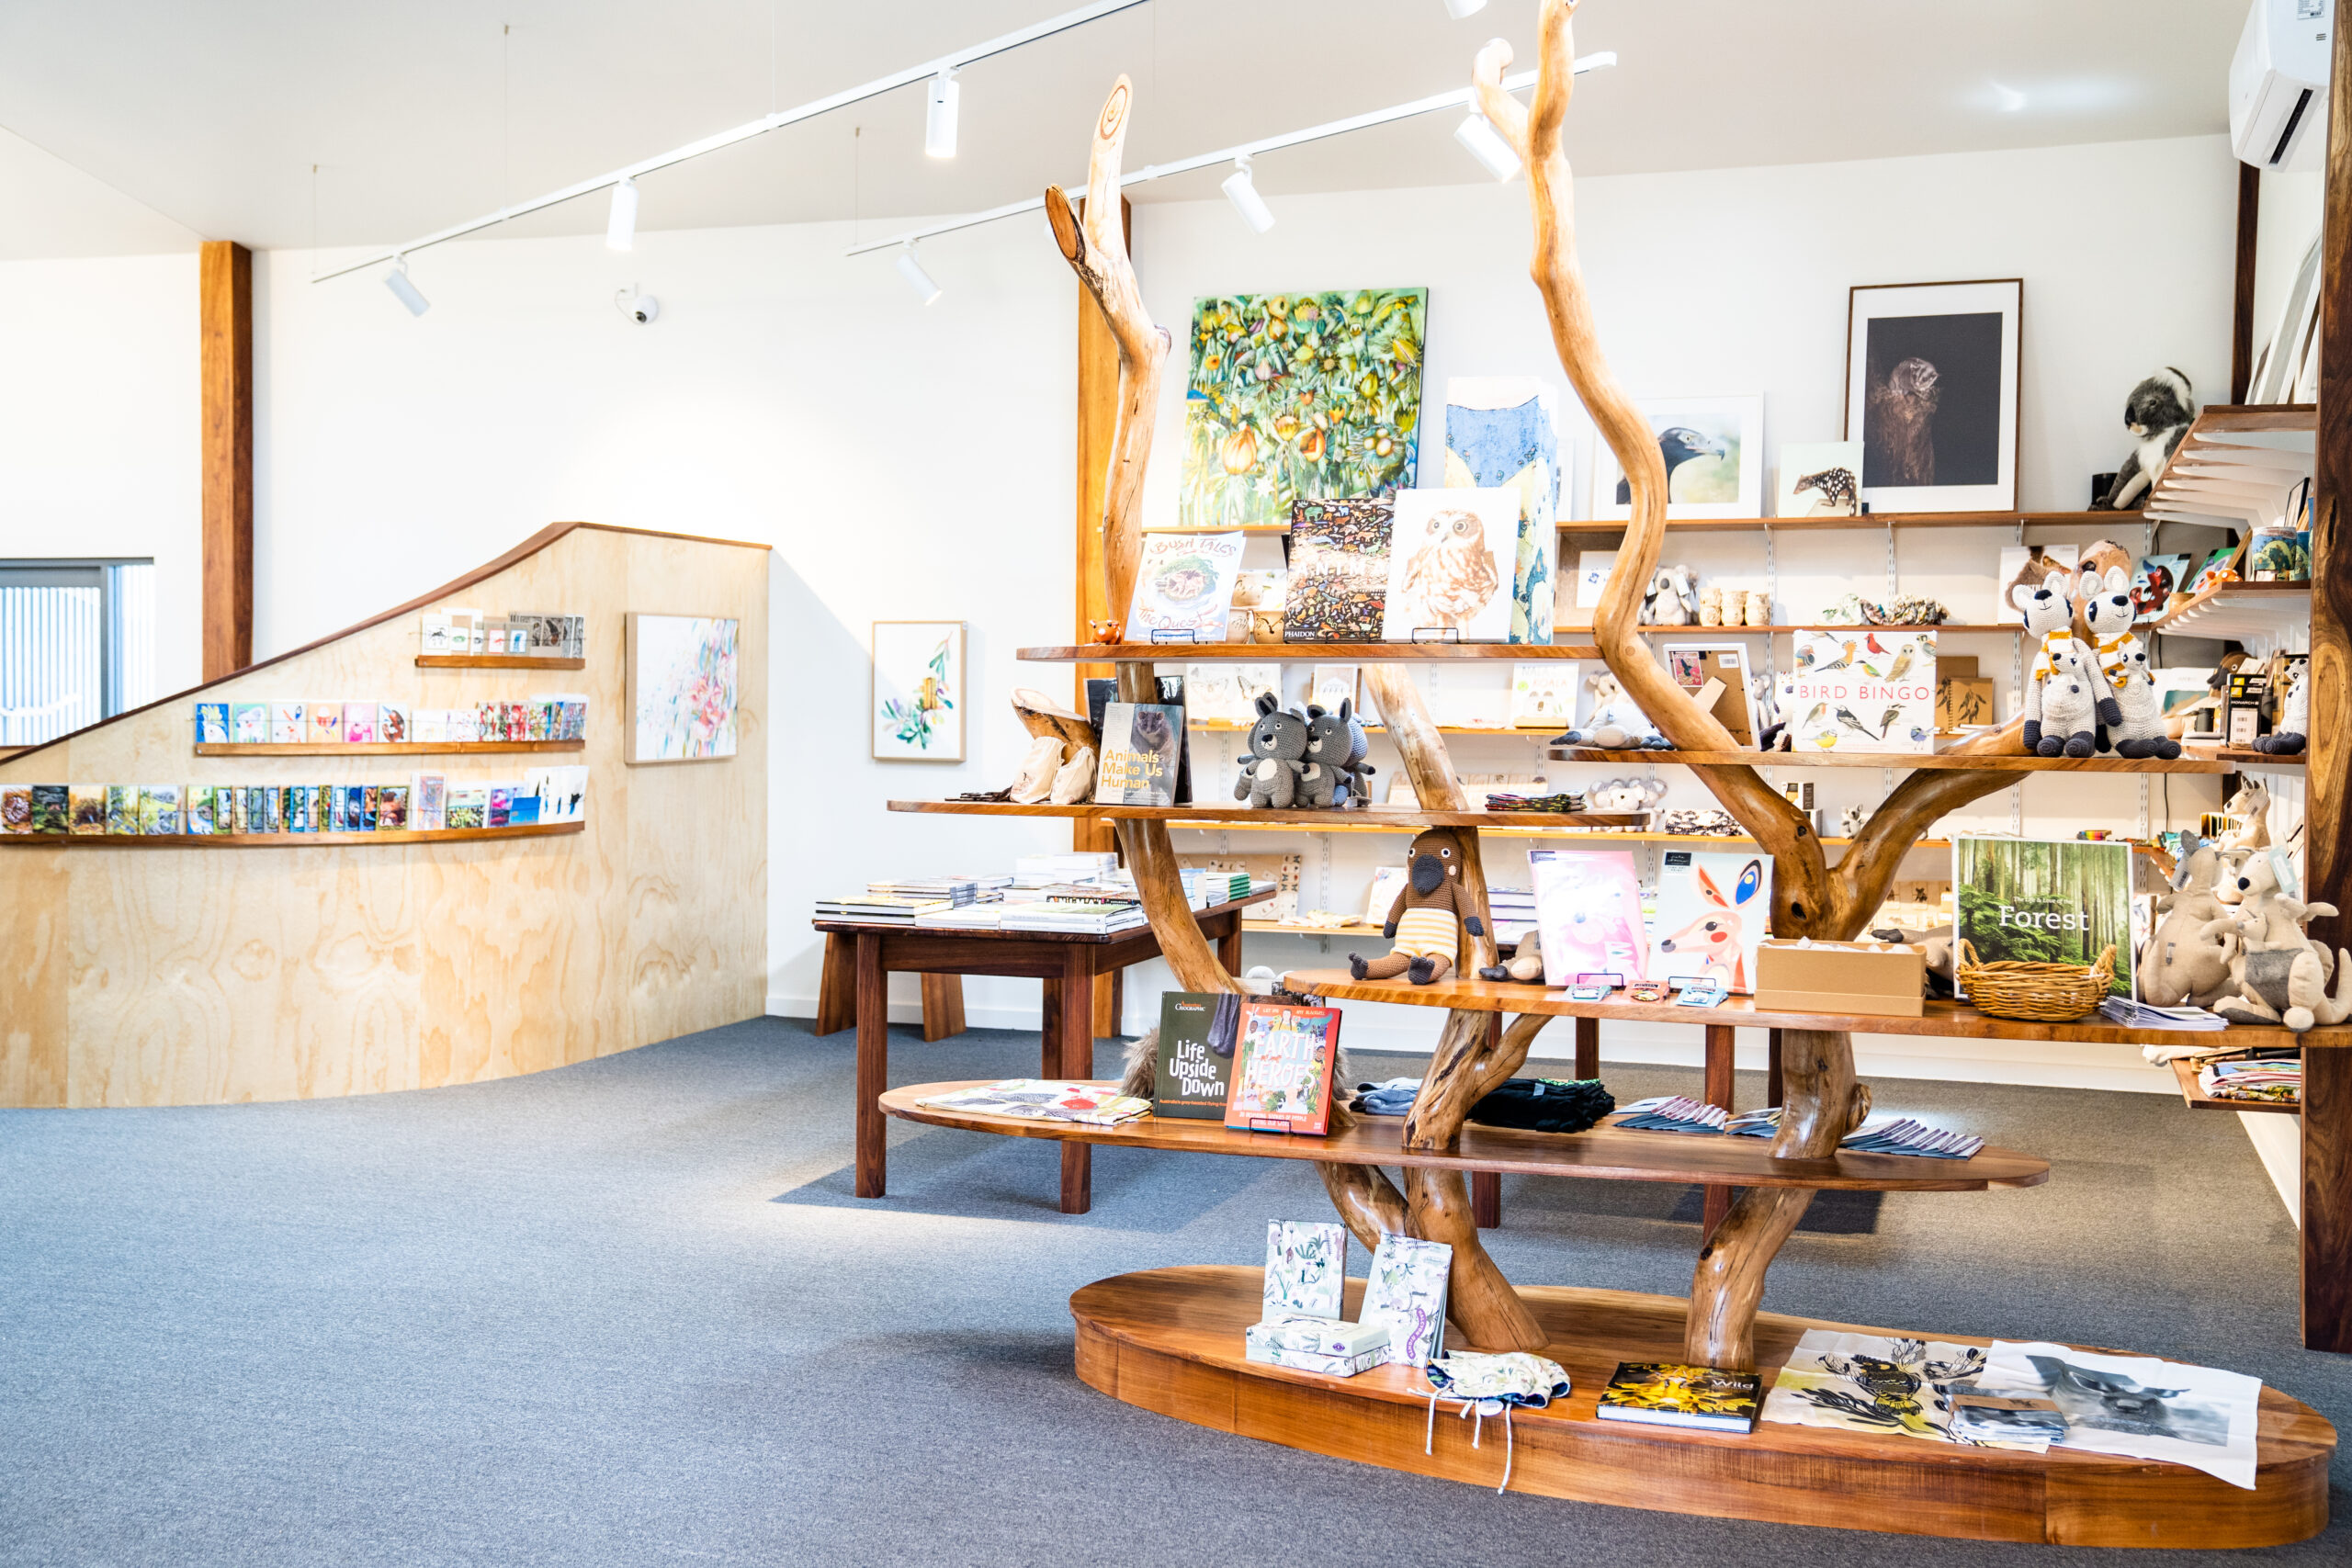 wildlife wonders gift shop from the front entrance showing shelves made from branches